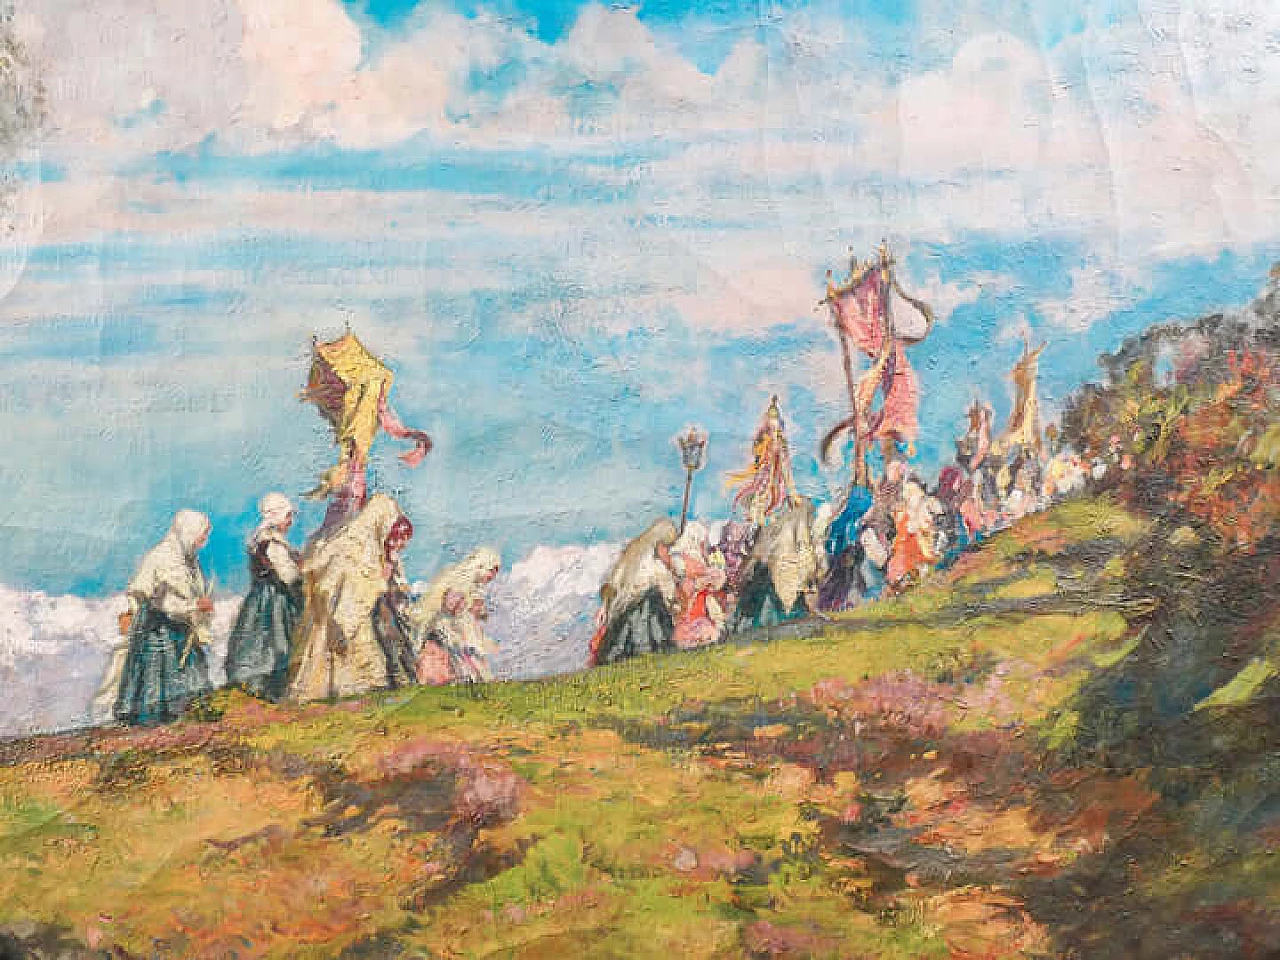 Mario Gachet, Procession in Frassineto Canavese, oil painting on canvas, early 20th century 3